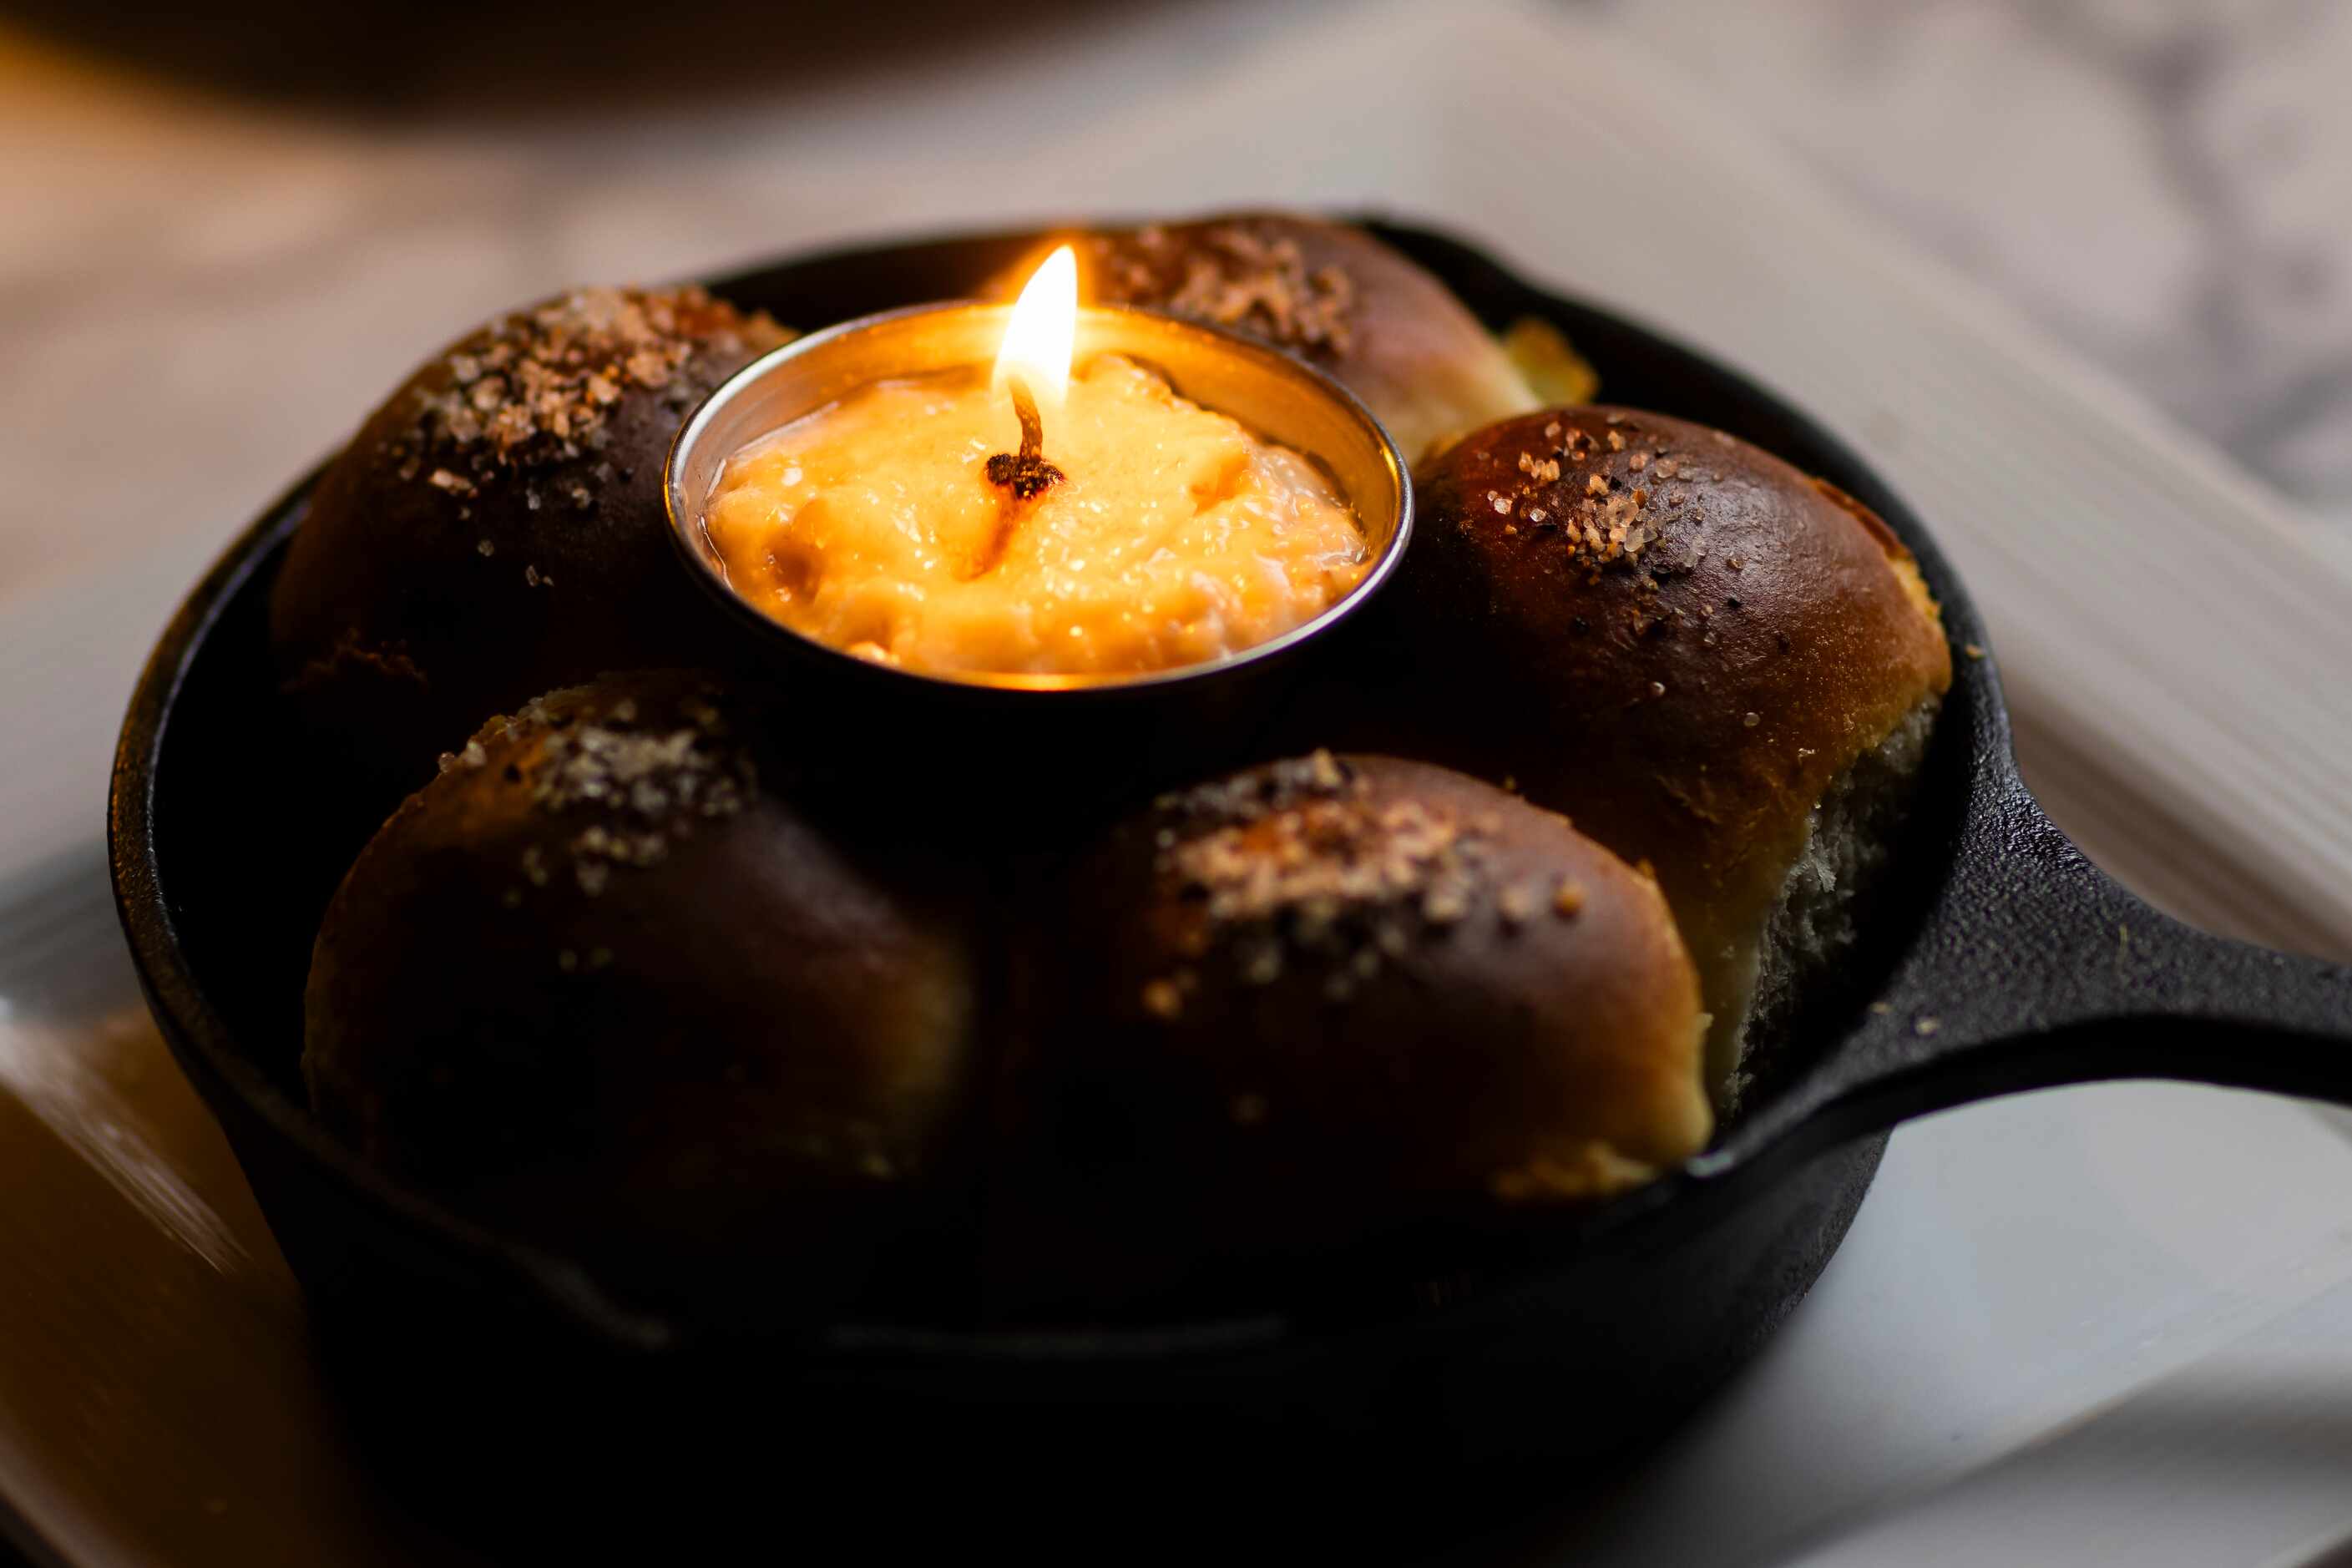 The Cast-Iron Parker House Rolls with smoked garlic salt and a roasted garlic butter candle...